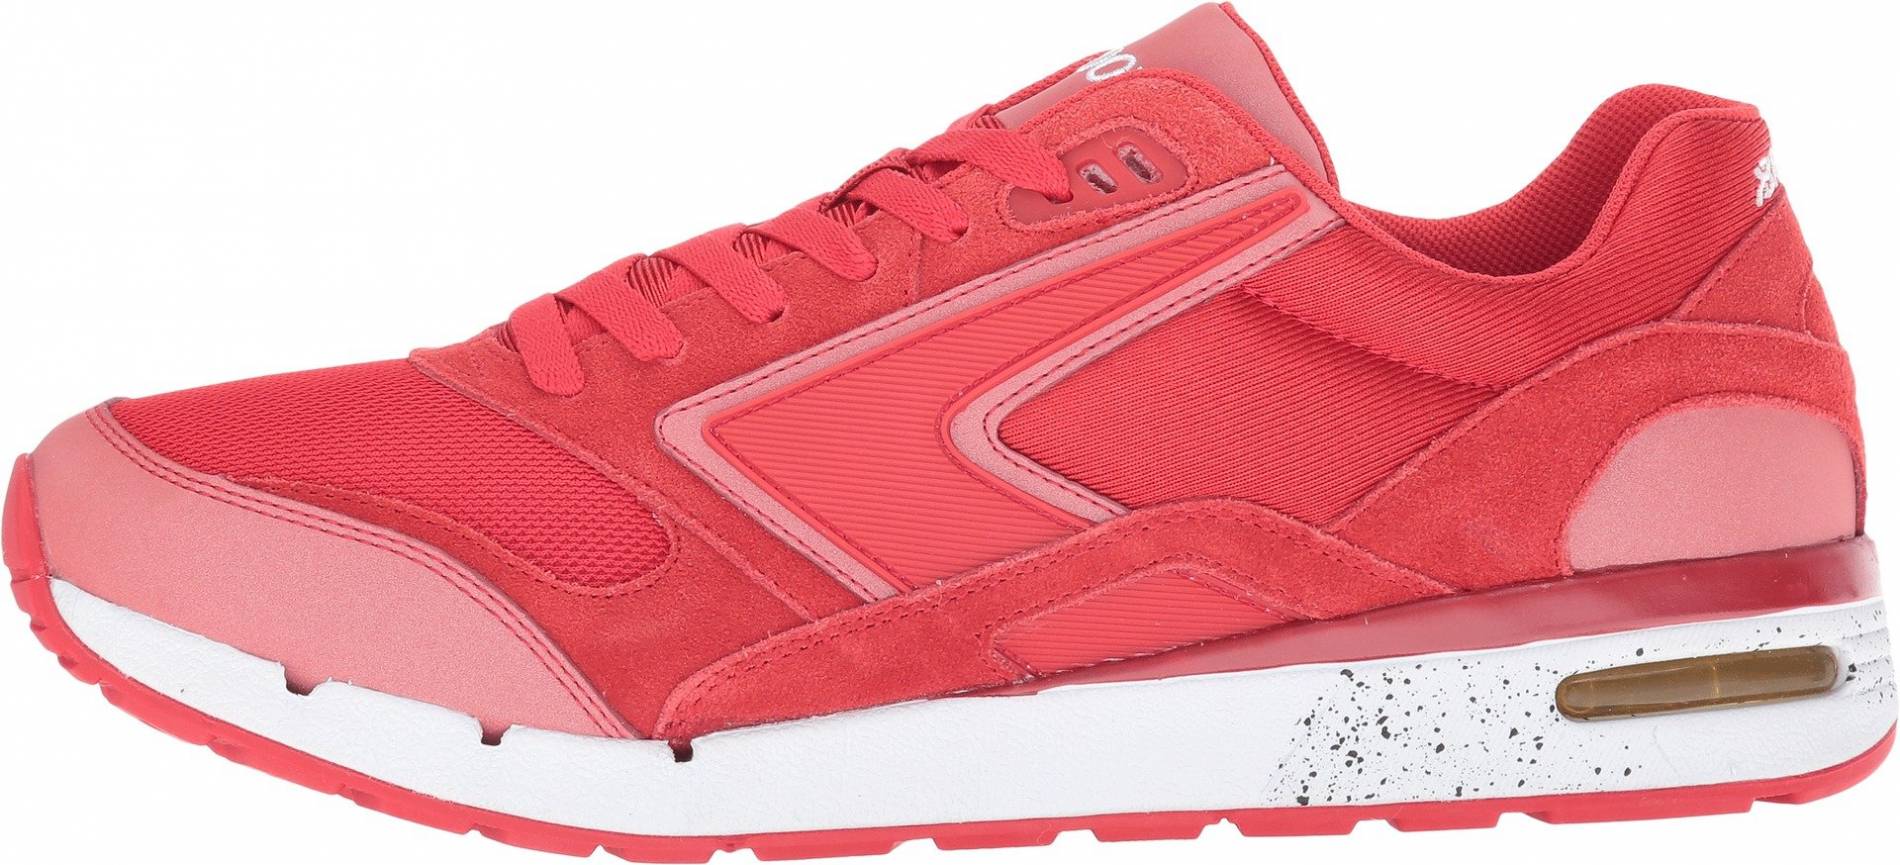 where to buy brooks sneakers